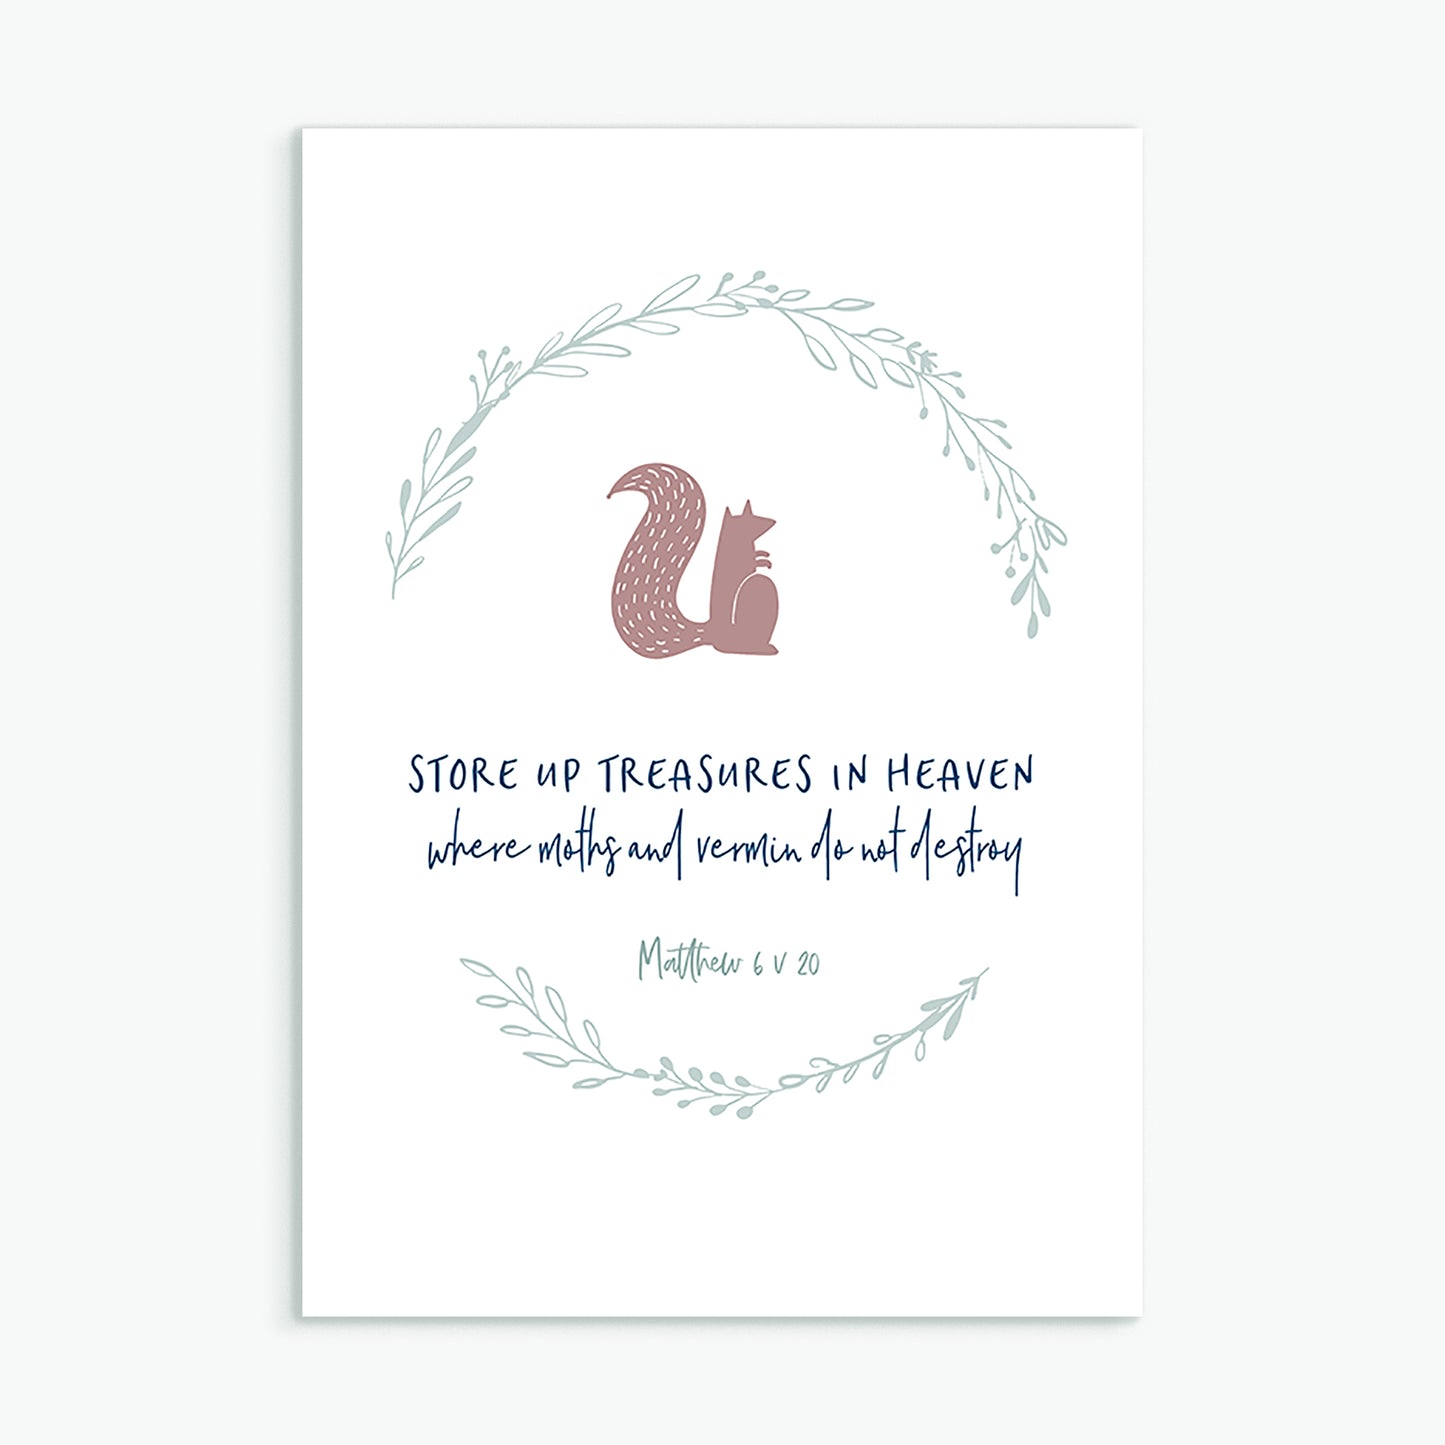 Store up treasures in heaven greeting card